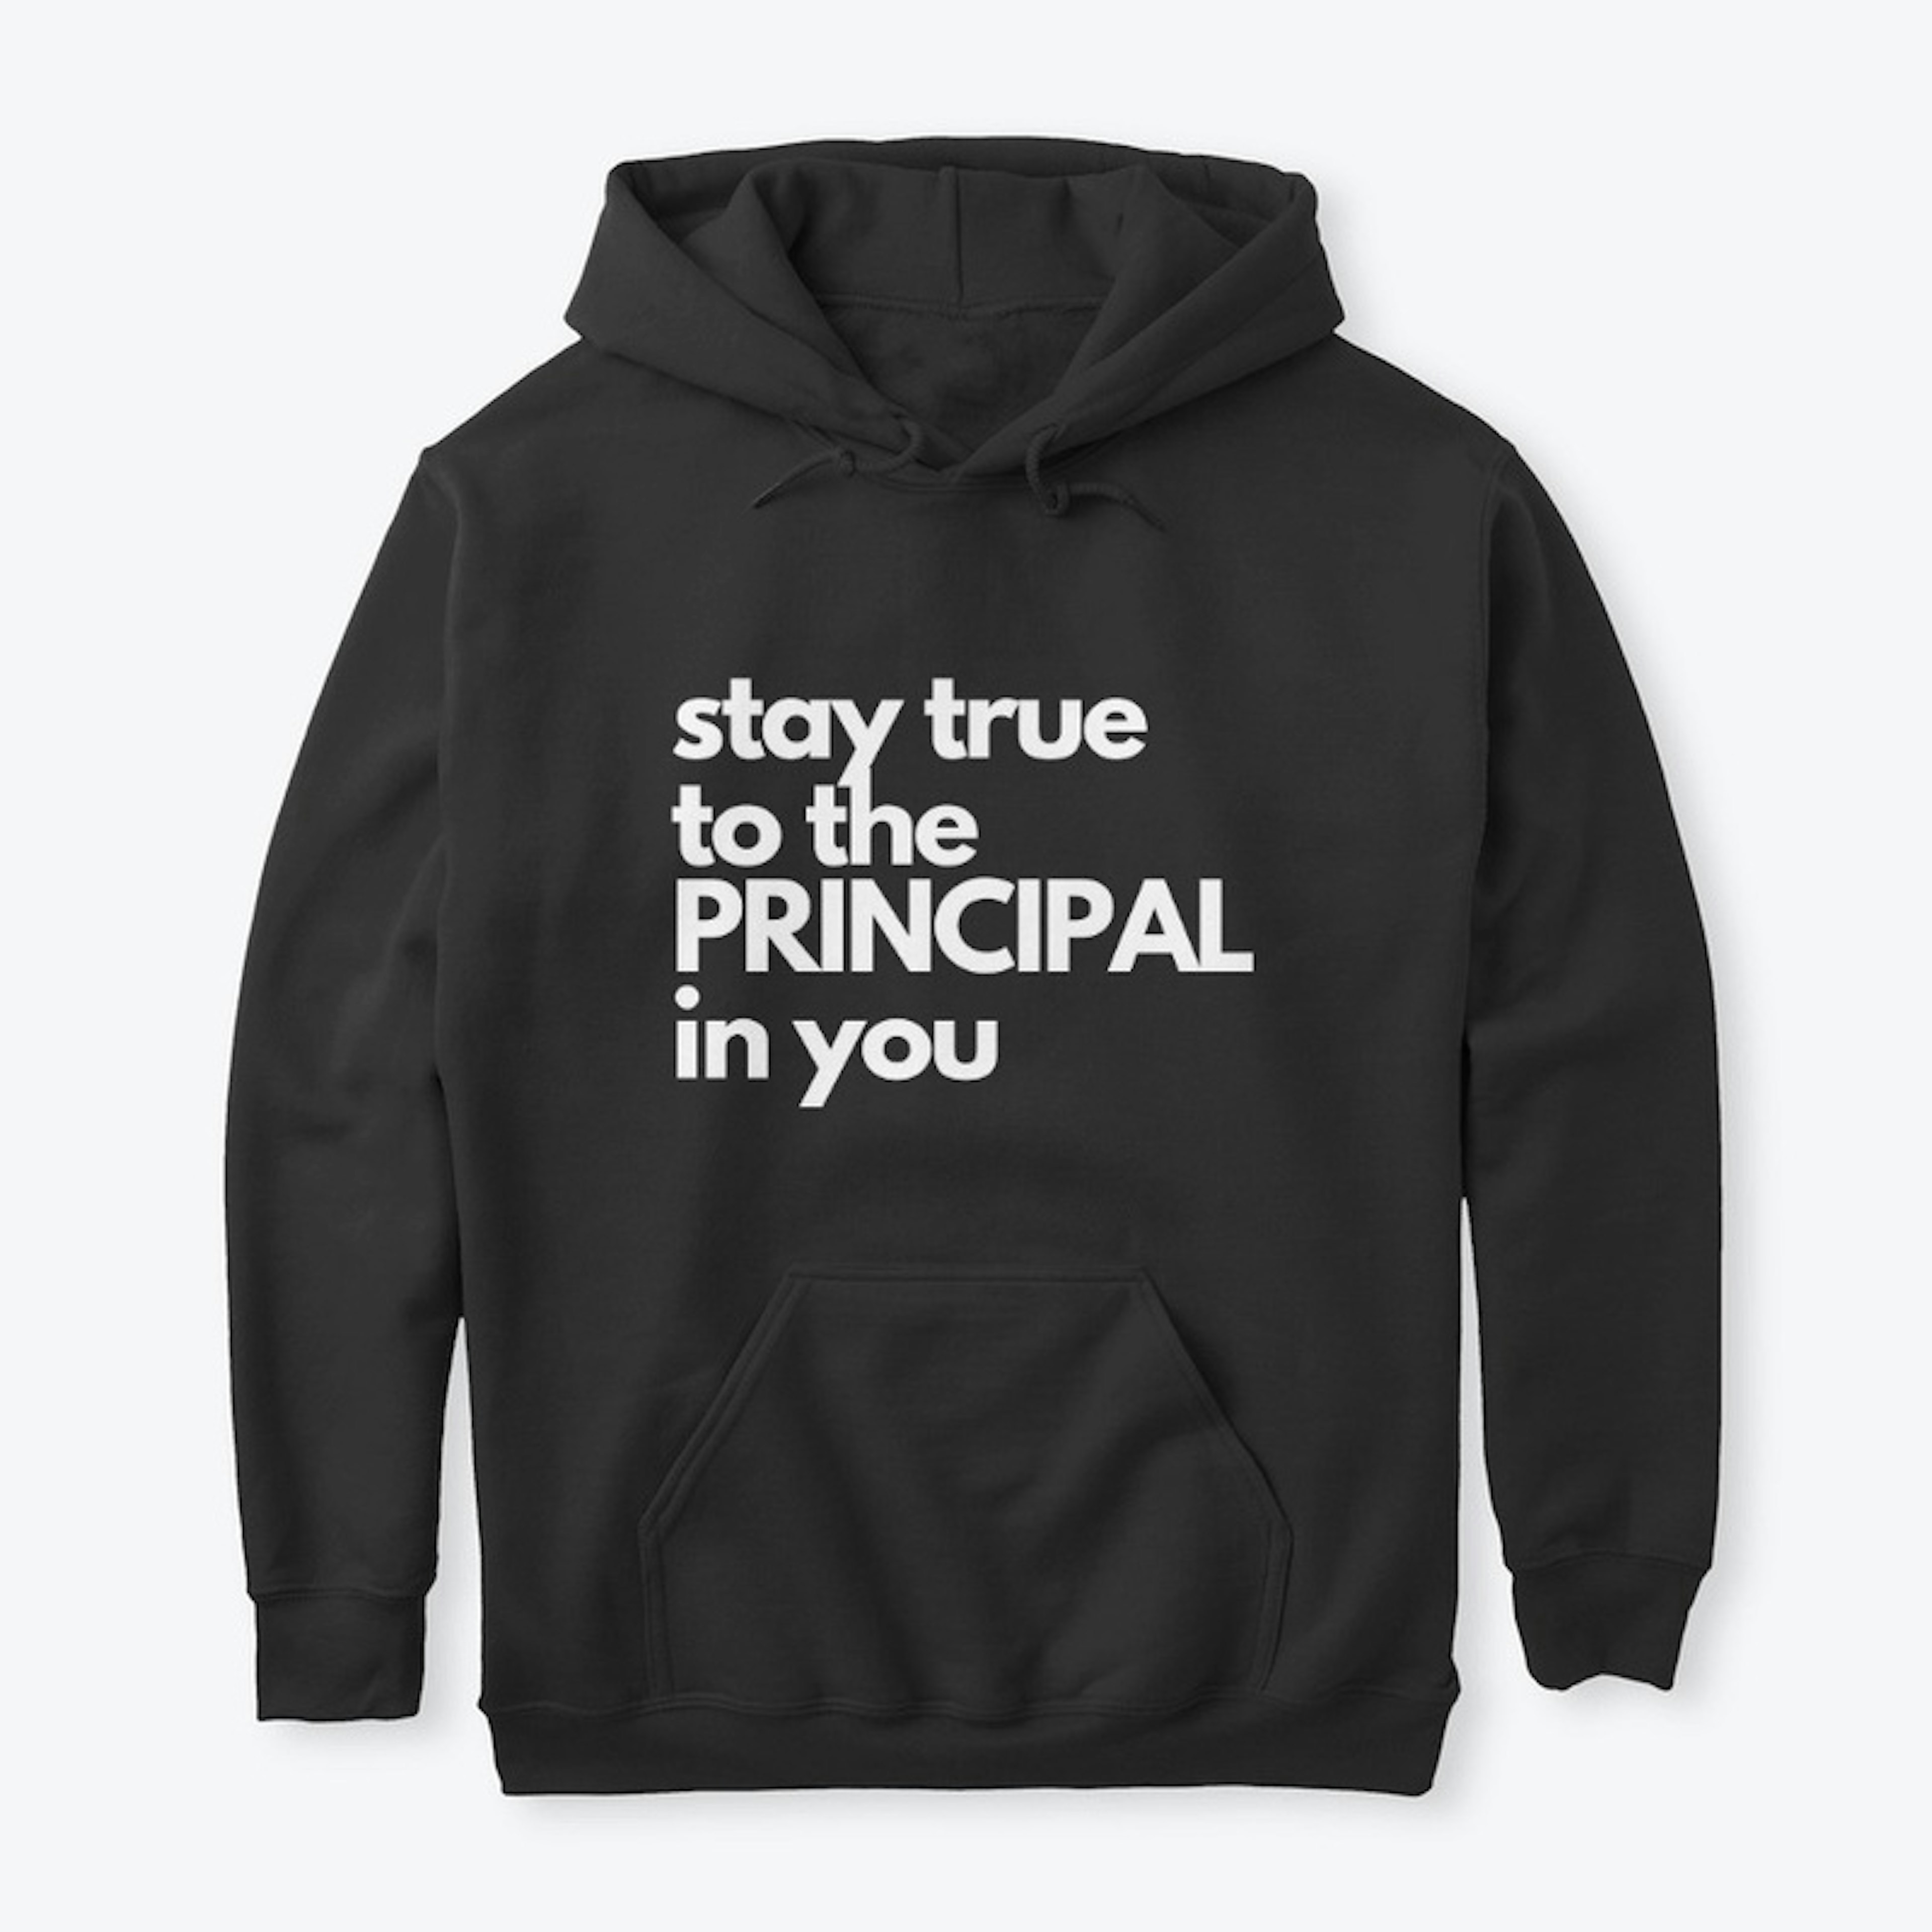 "Stay True to the Princpal in You" (II)